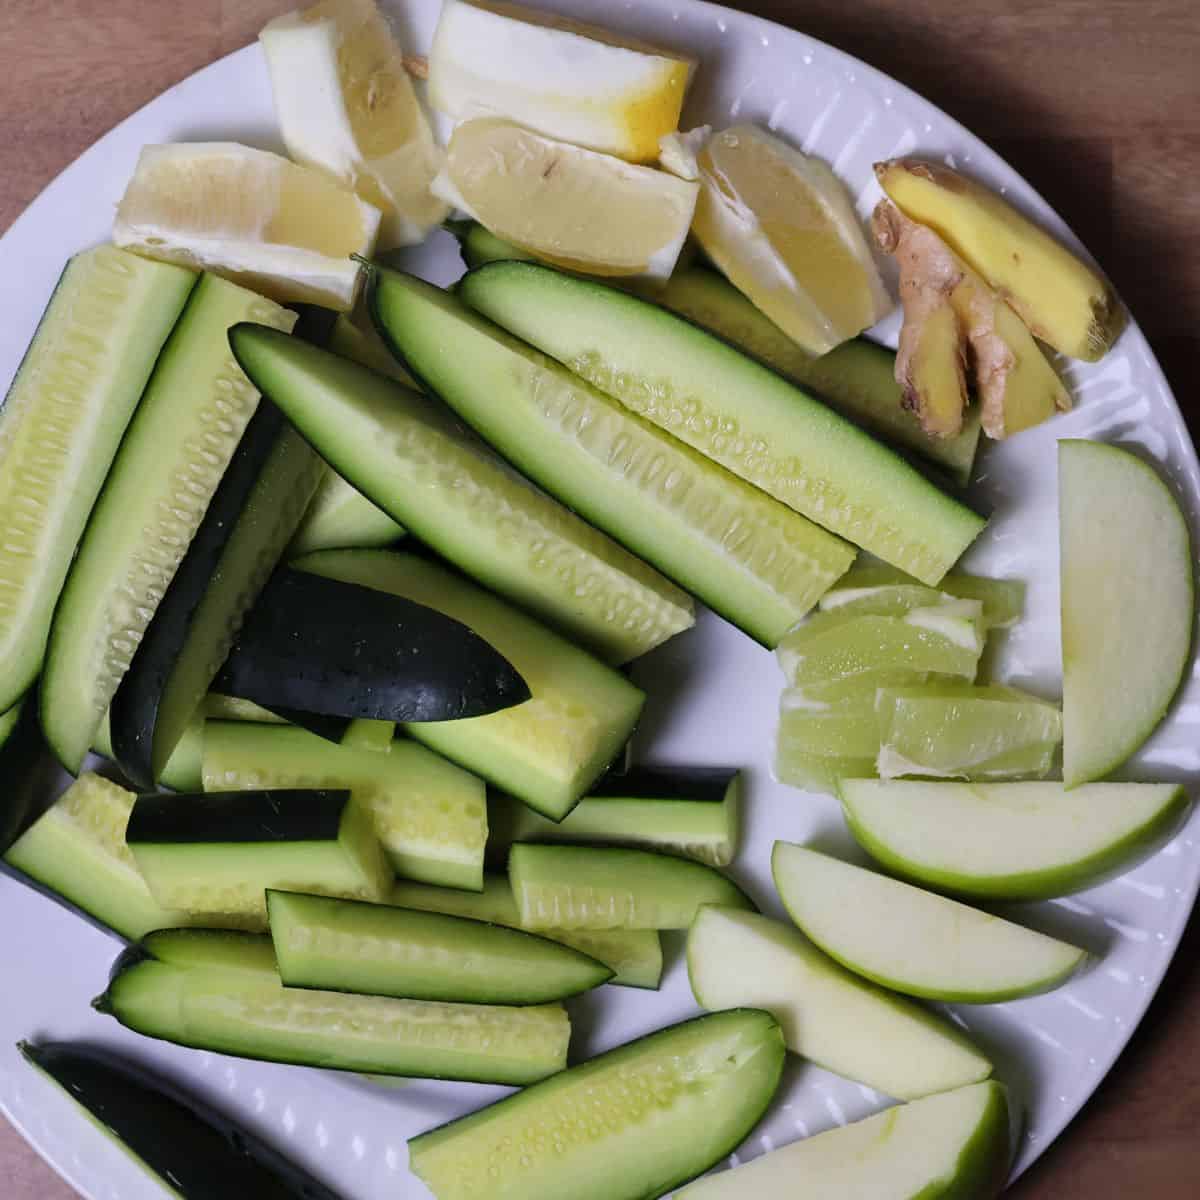 A plate of prepared ingredients including cucumber slices, lemon wedges, lime pieces, ginger slices, and apple slices ready for juicing.